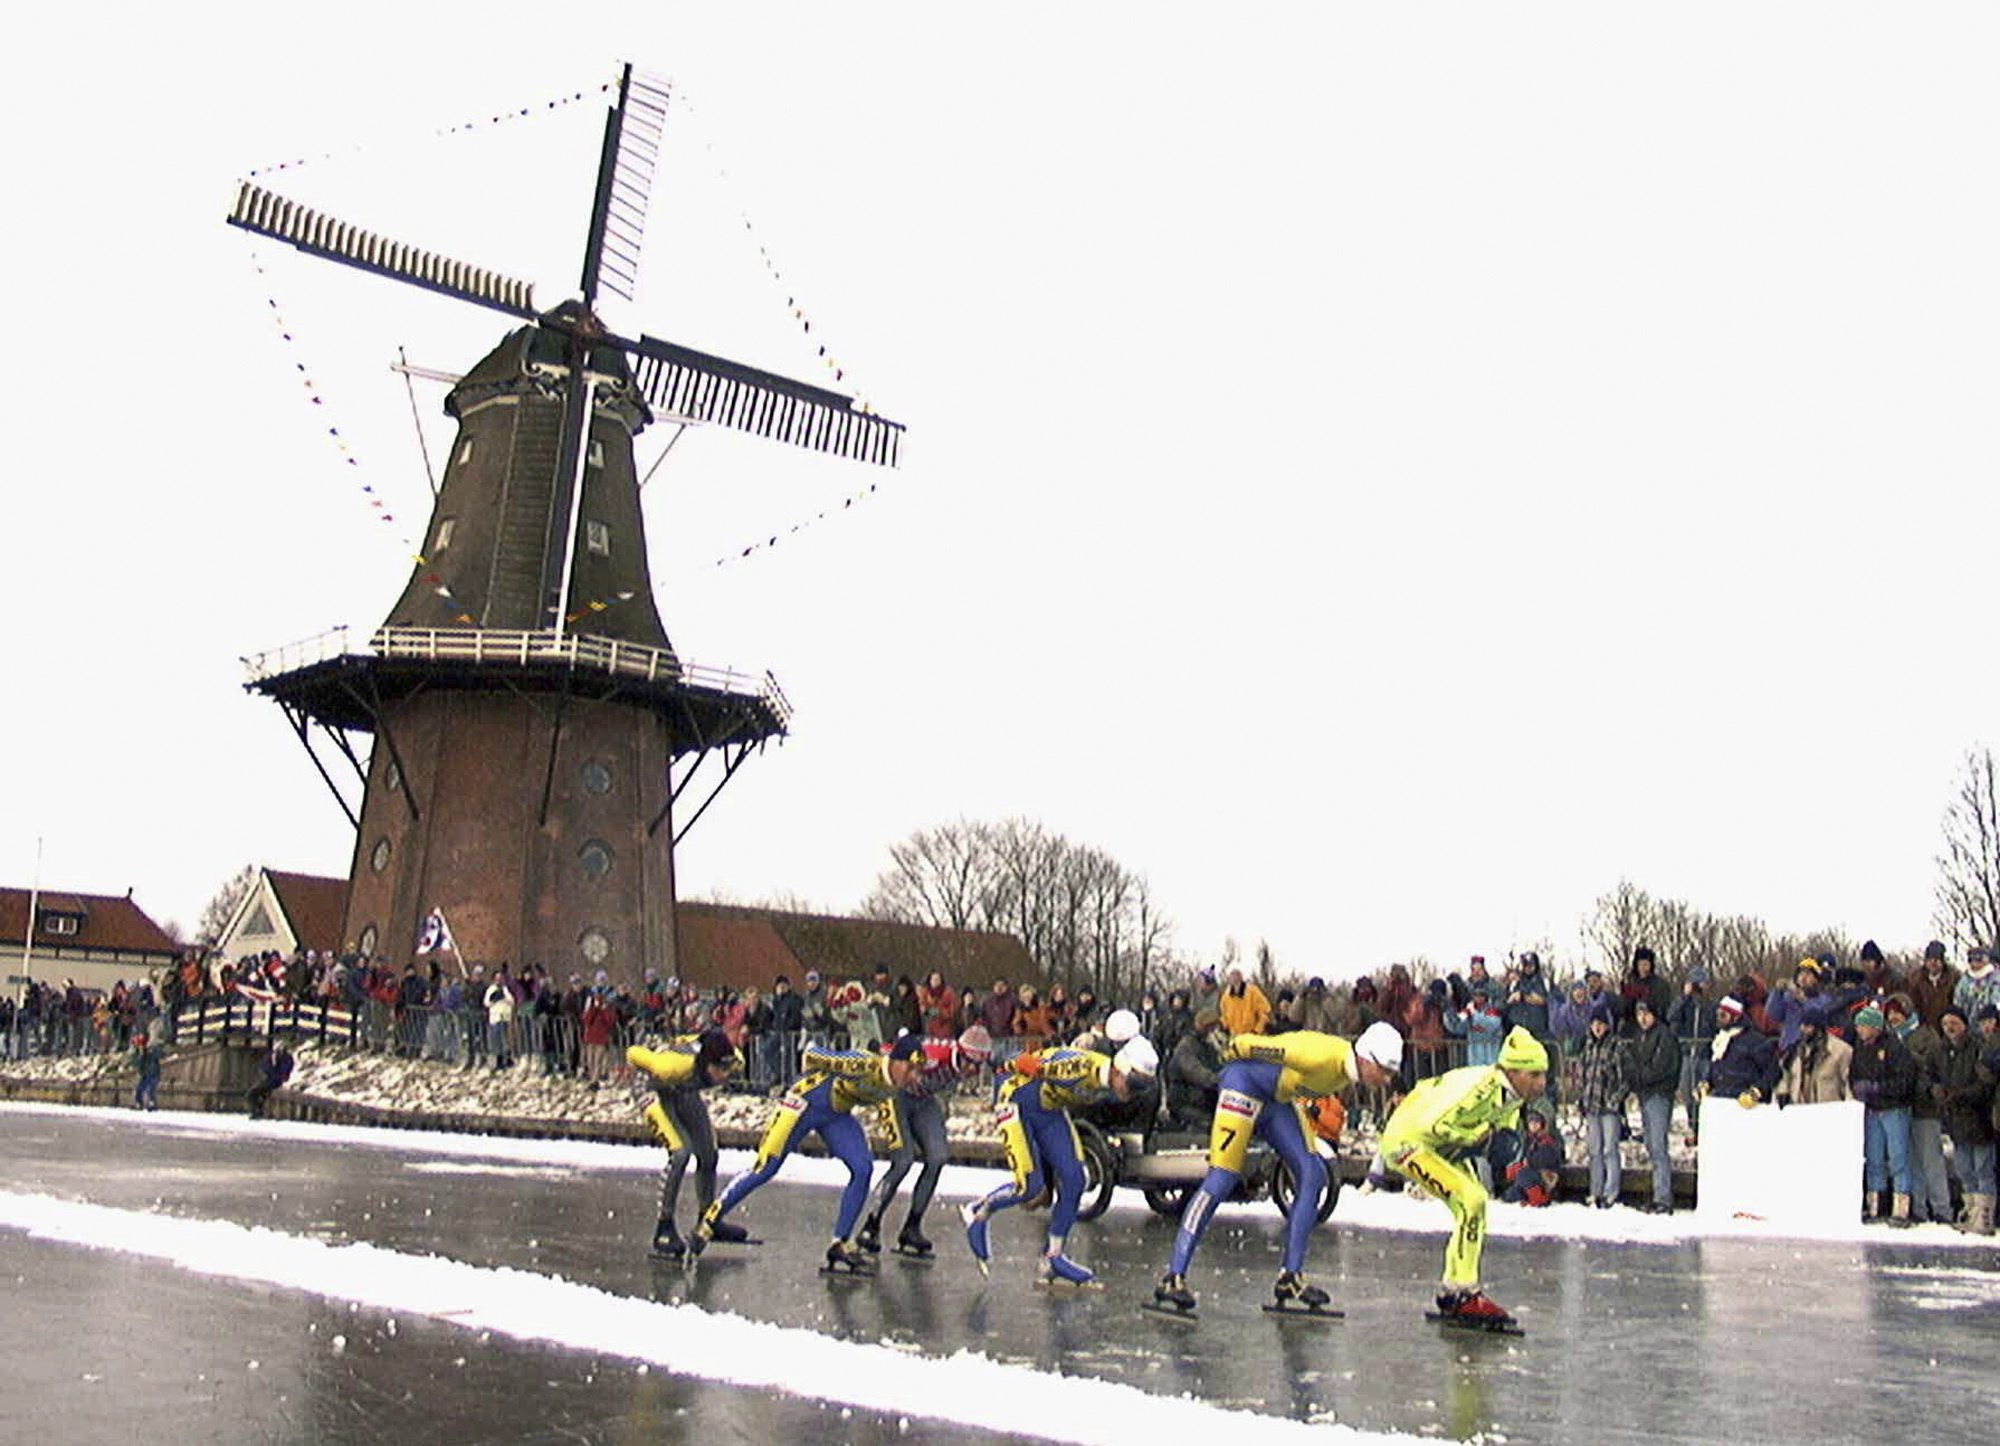 In this Jan. 4, 1997, file photo, skaters pass a windmill as some 16,000 people participate in the historic 200km skating spectacle the 'Elfstedentocht' (eleven-cities-course) in Birdaard, province of Friesland, northern Netherlands. There is nothing more mythical in Dutch sports than an age-old 11-city race skating across lakes and canals in bone-numbing cold from dawn to dusk. (AP Photo/Dimitri Georganas, File)